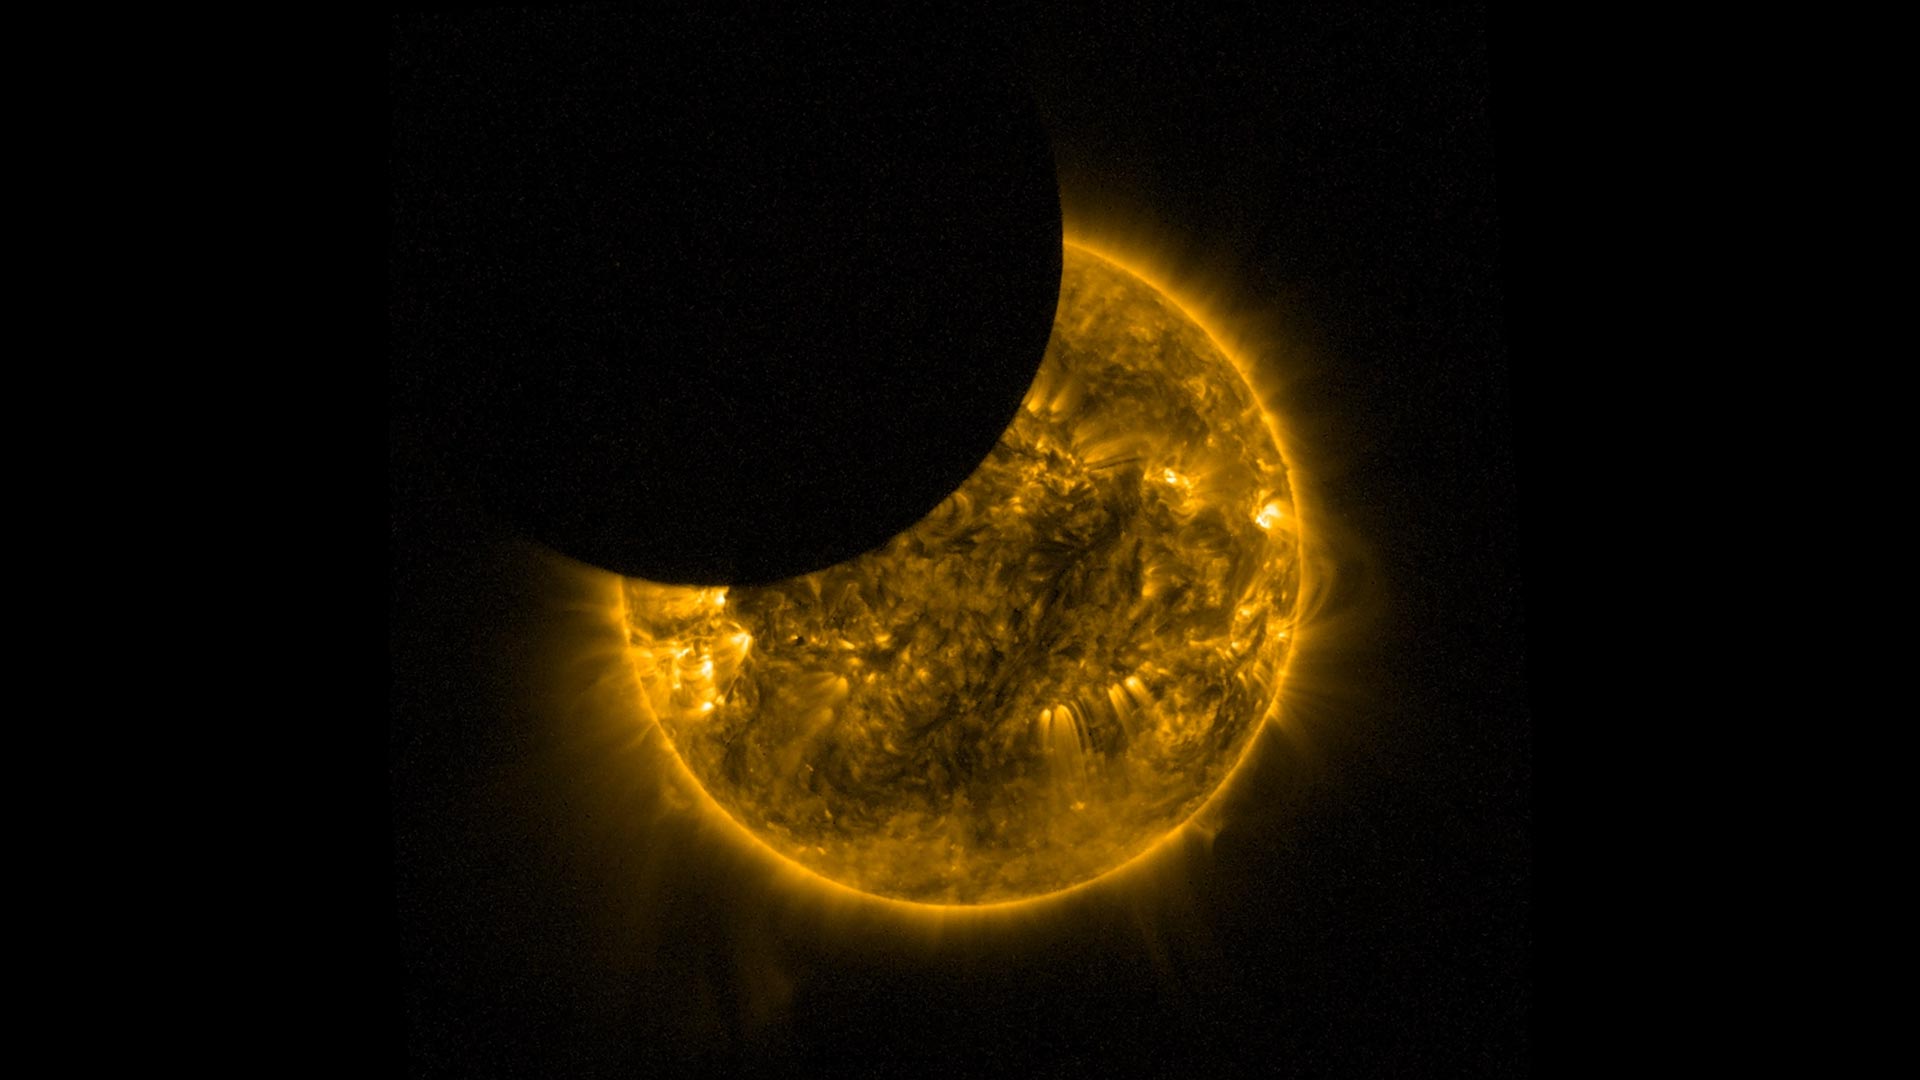 Proba2 Satellite Sees the Moon Eclipse the Sun Twice [Video] Pointers